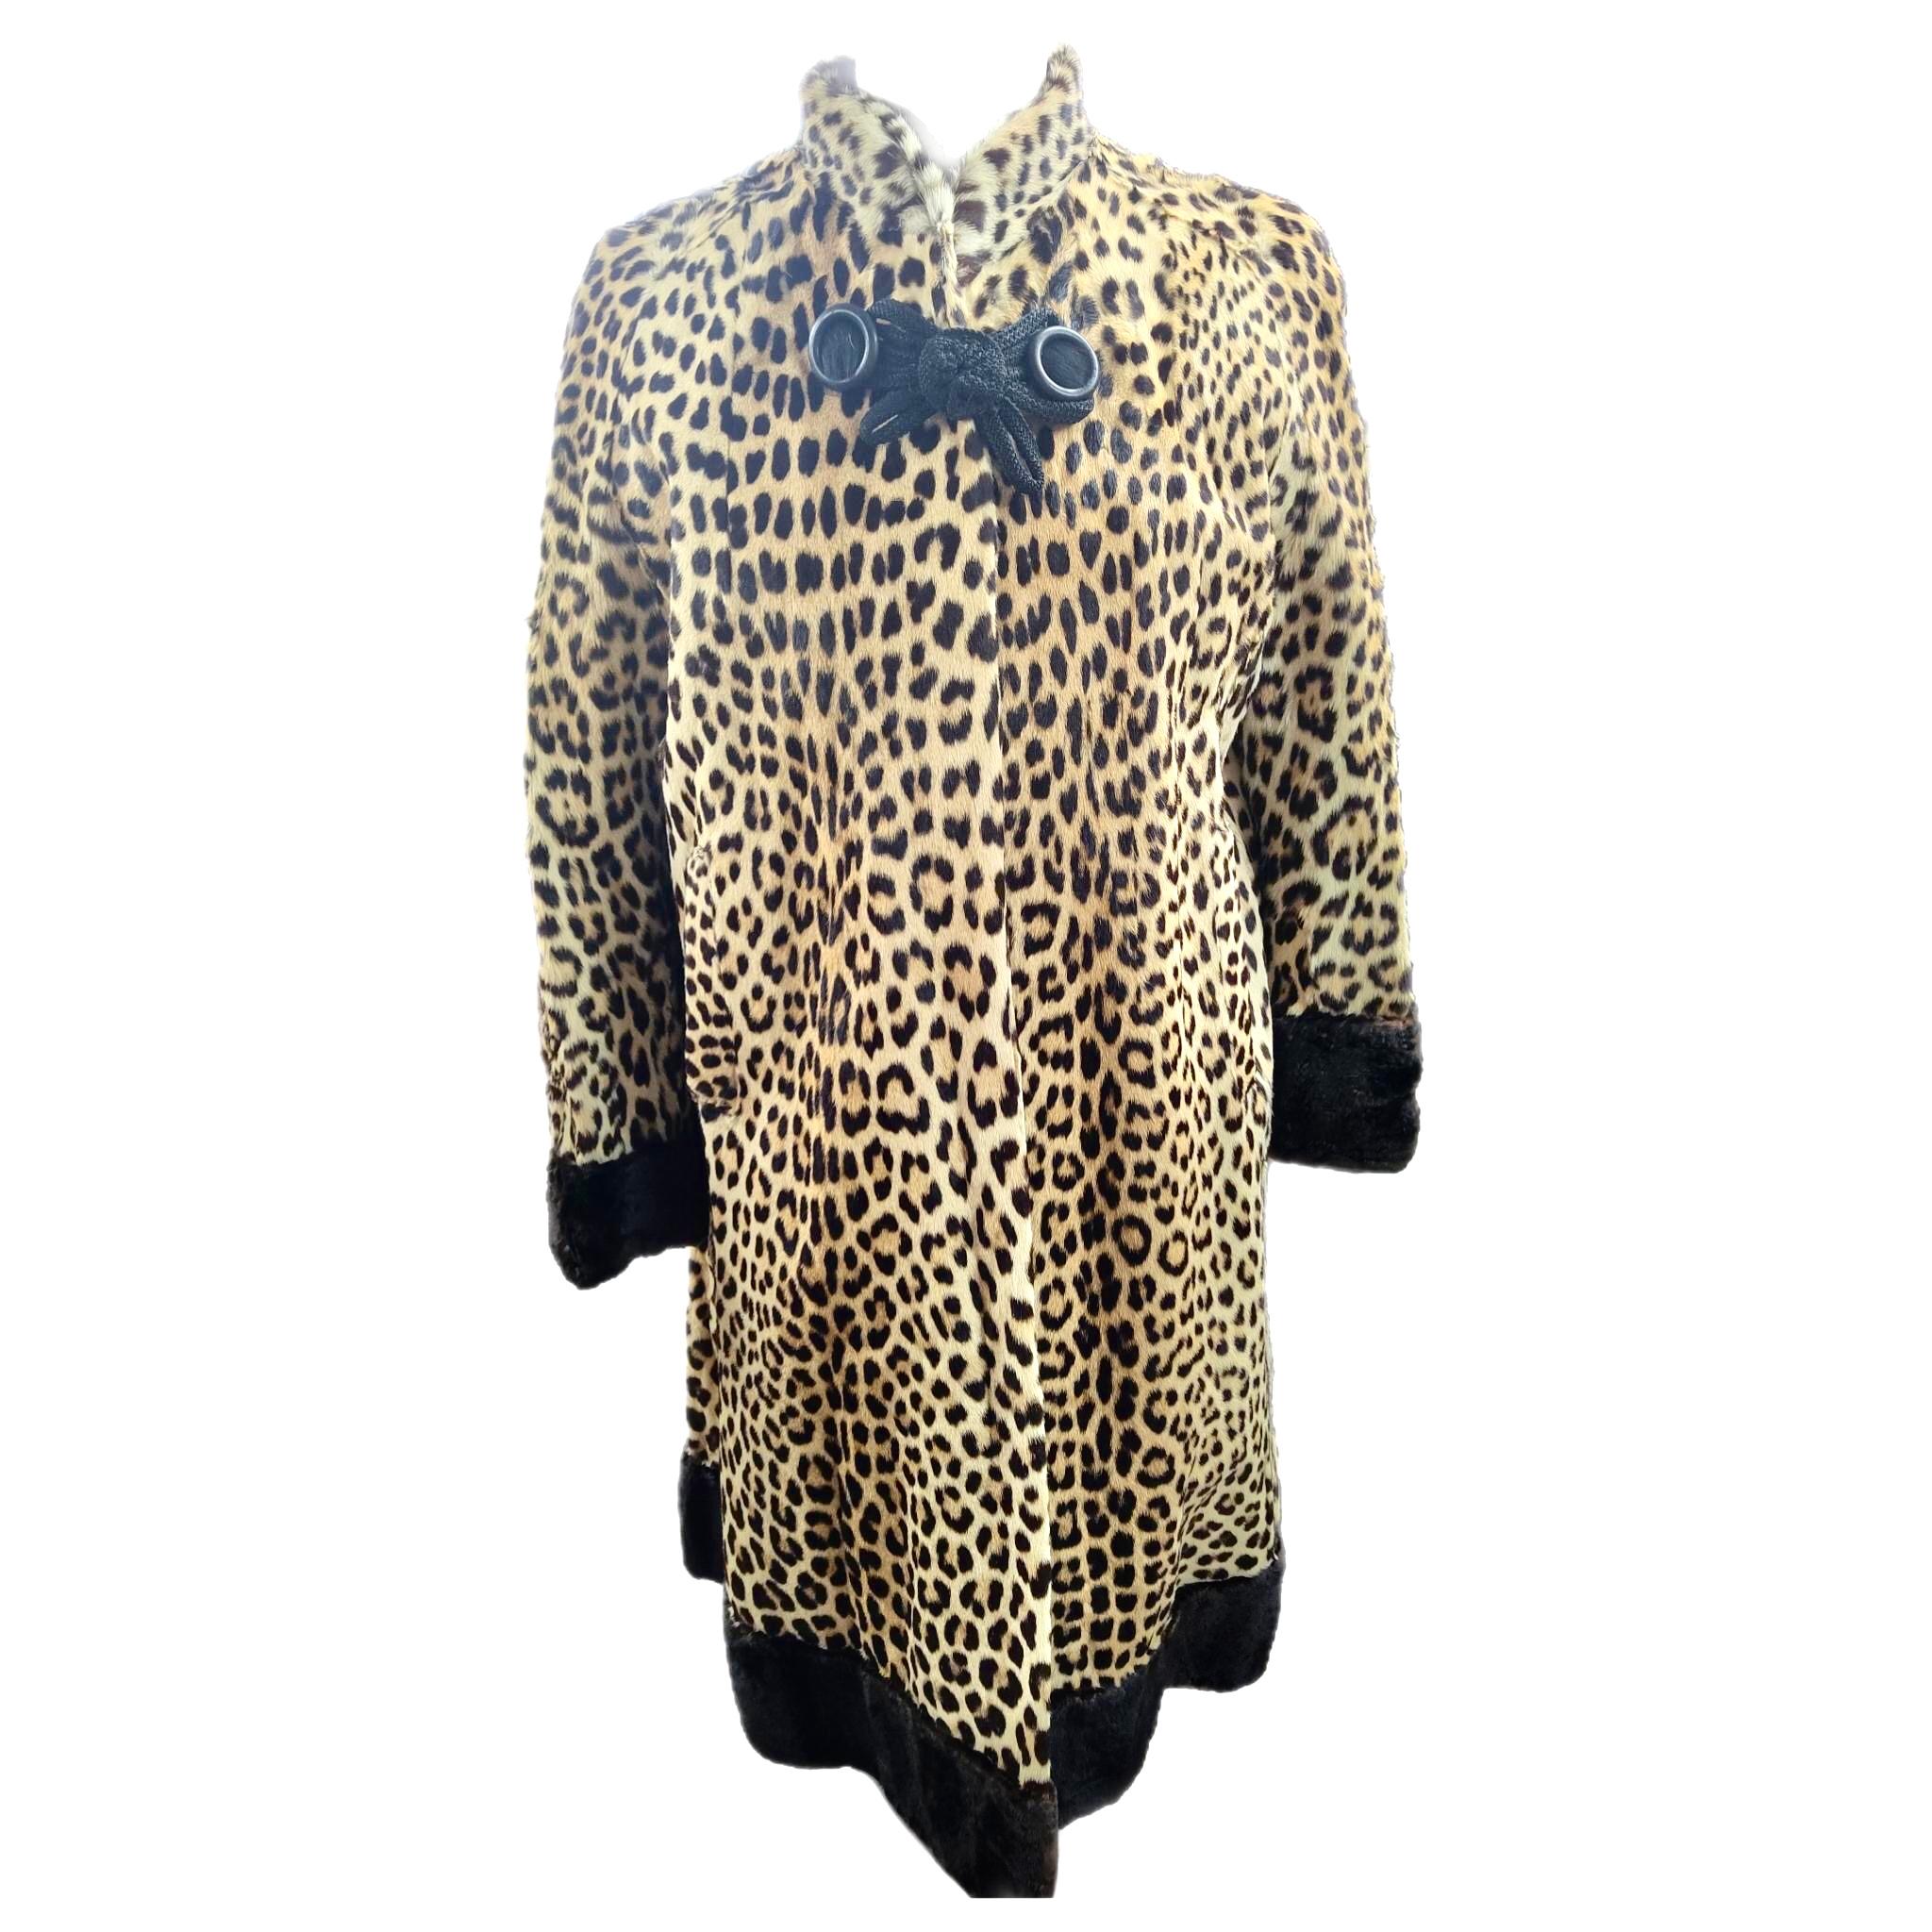 PRODUCT DESCRIPTION:

Vintage leopard fur coat size 10-12

Absolutely brilliant piece of history a rare exotic vibrant colourful real leopard fur. In brand new condition has never been worn. unused lining. Impeccable supple skins, nice wide sweep